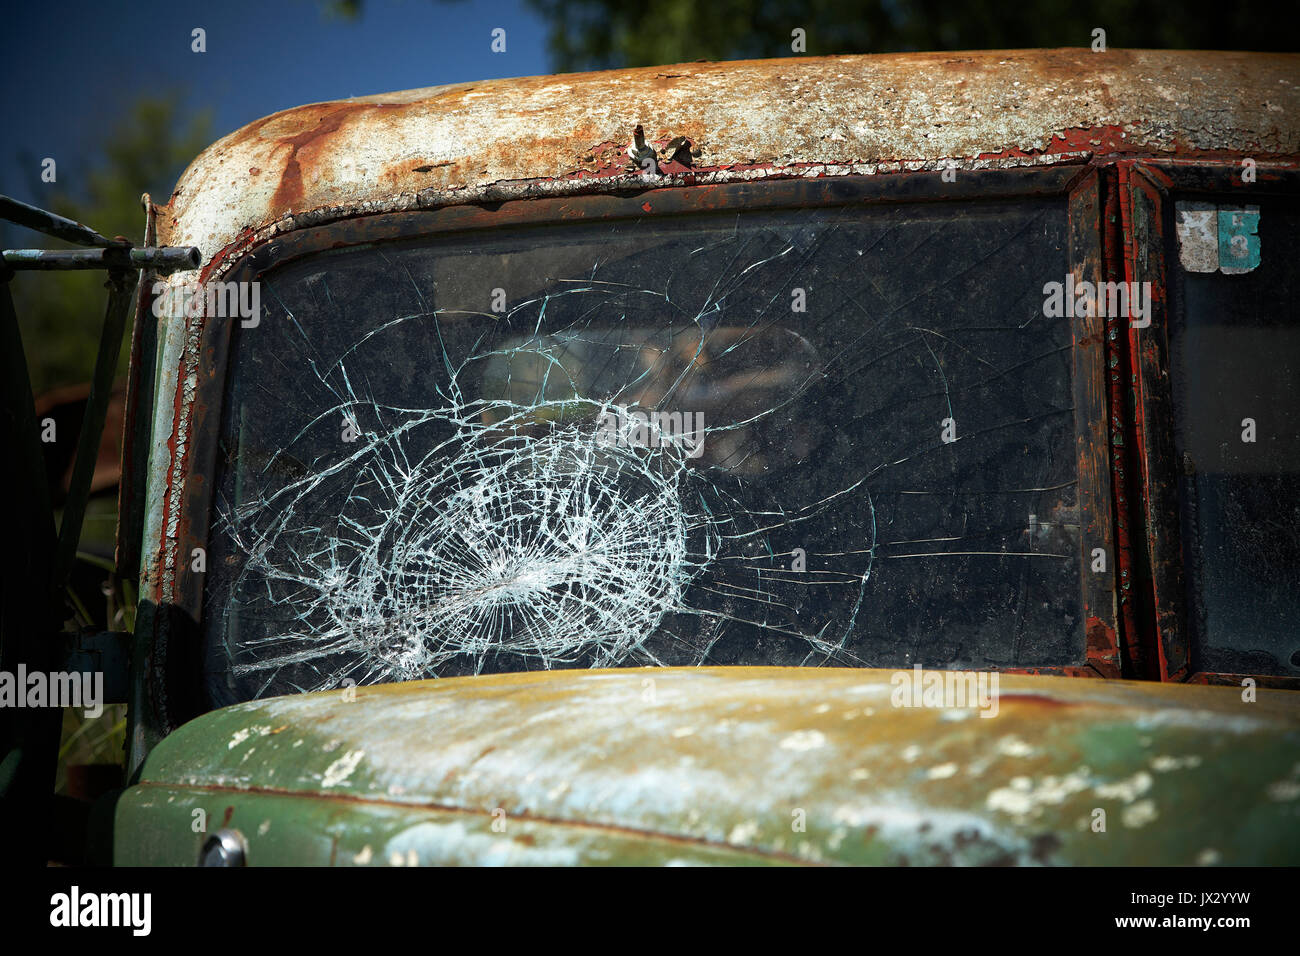 rusting old pick up truck dumped in scrub ground Stock Photo